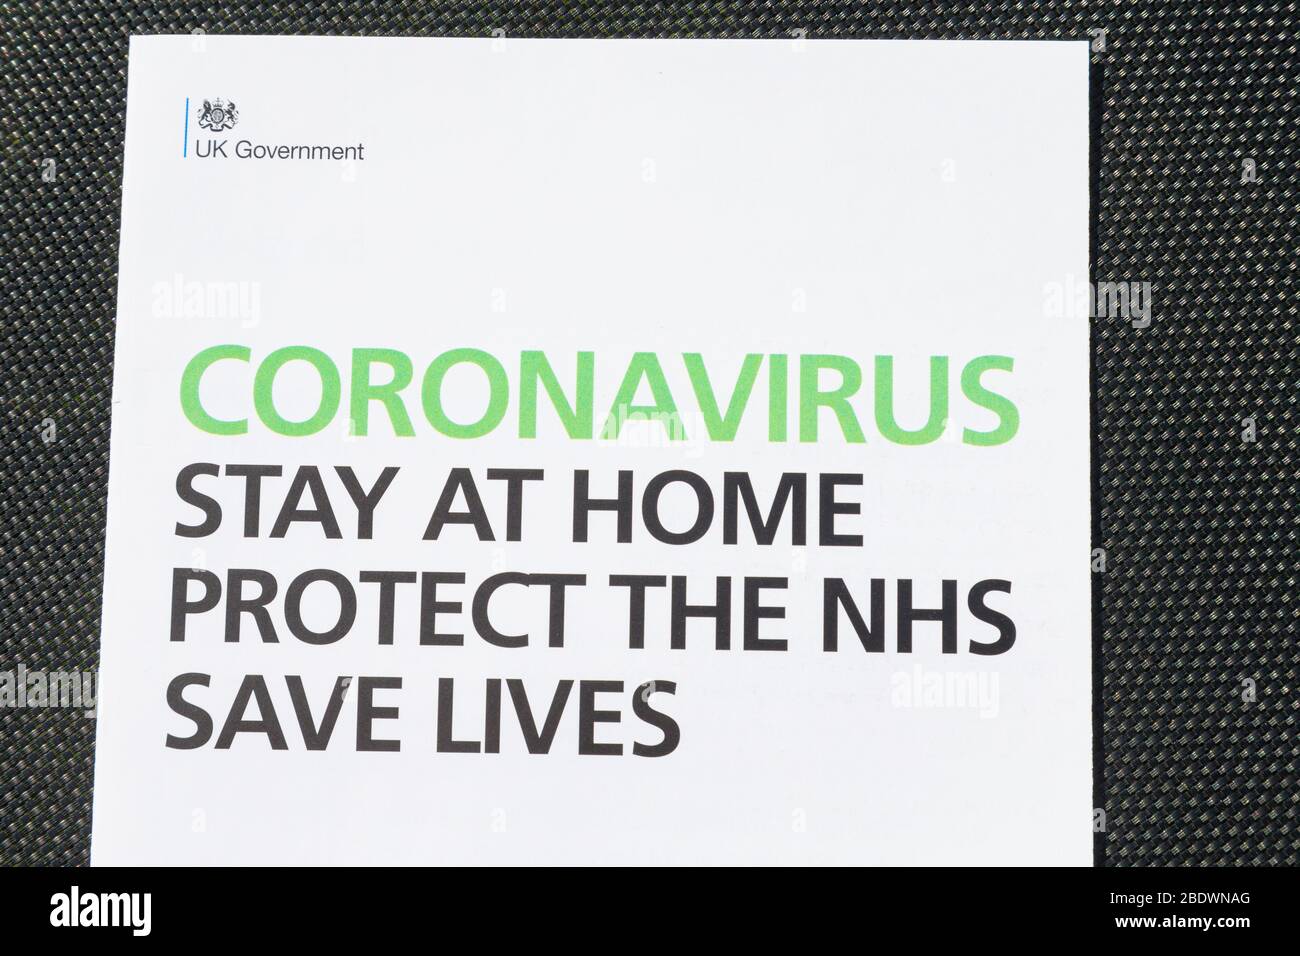 Ashford, Kent, UK. 10th Apr, 2020. Information pack distributed by the UK Government arrives in the post with an update about the coronavirus pandemic. Stay at home, protect the NHS, save lives. ©Paul Lawrenson 2020, Photo Credit: Paul Lawrenson/Alamy Live News Stock Photo